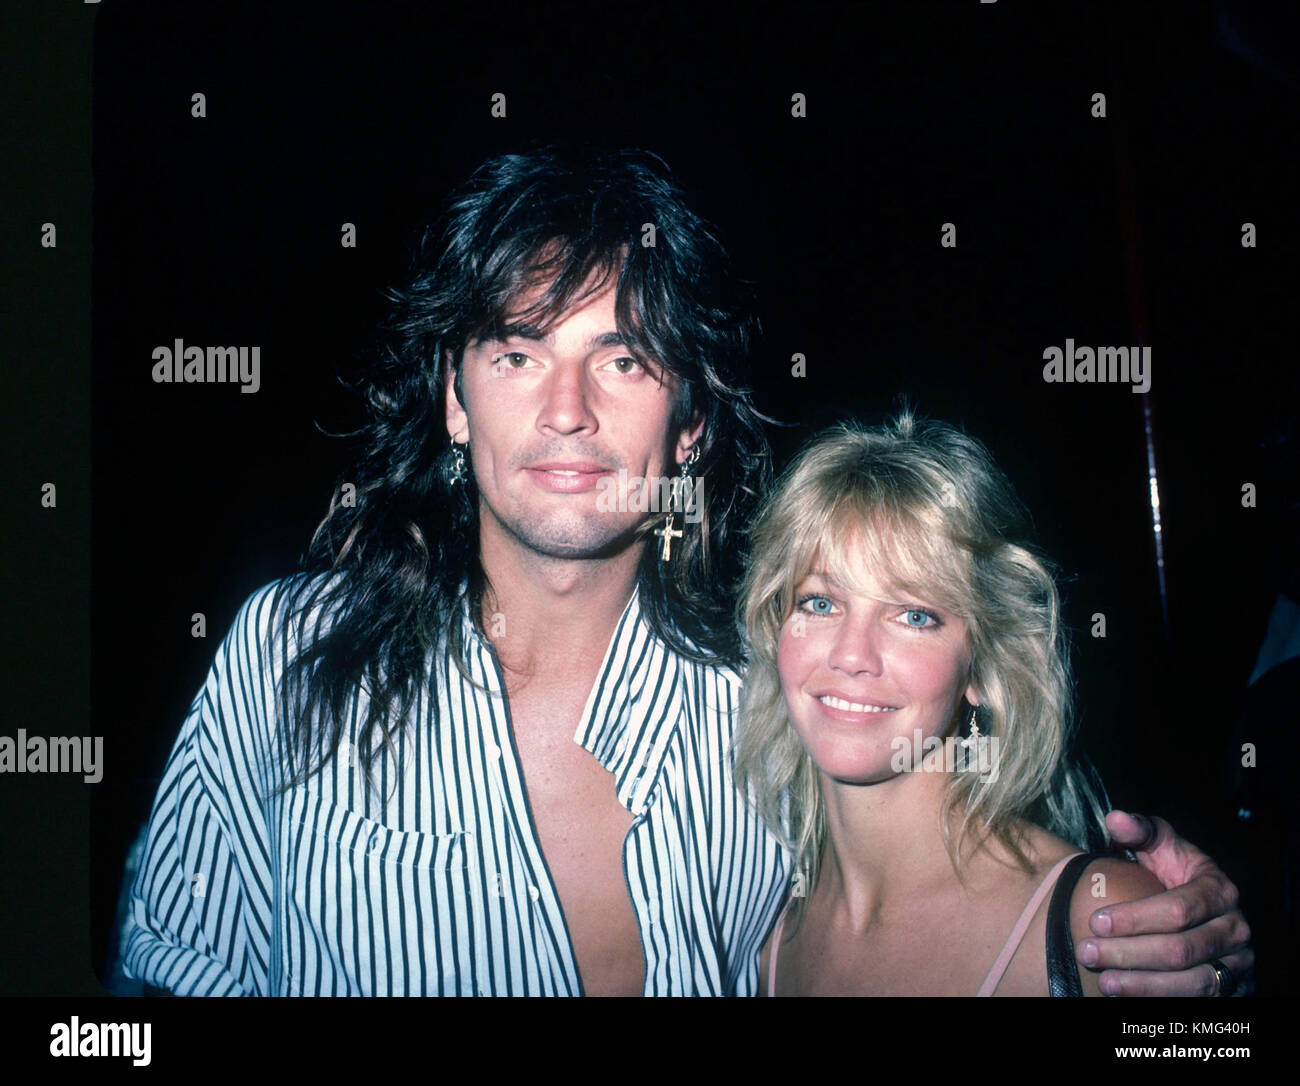 L-R) Musician Tommy Lee and actress Heather Locklear attend Billy Idol  concert backstage at The Forum on May 8, 1987 in Los Angeles, California.  Photo by Barry King/Alamy Stock Photo - Alamy